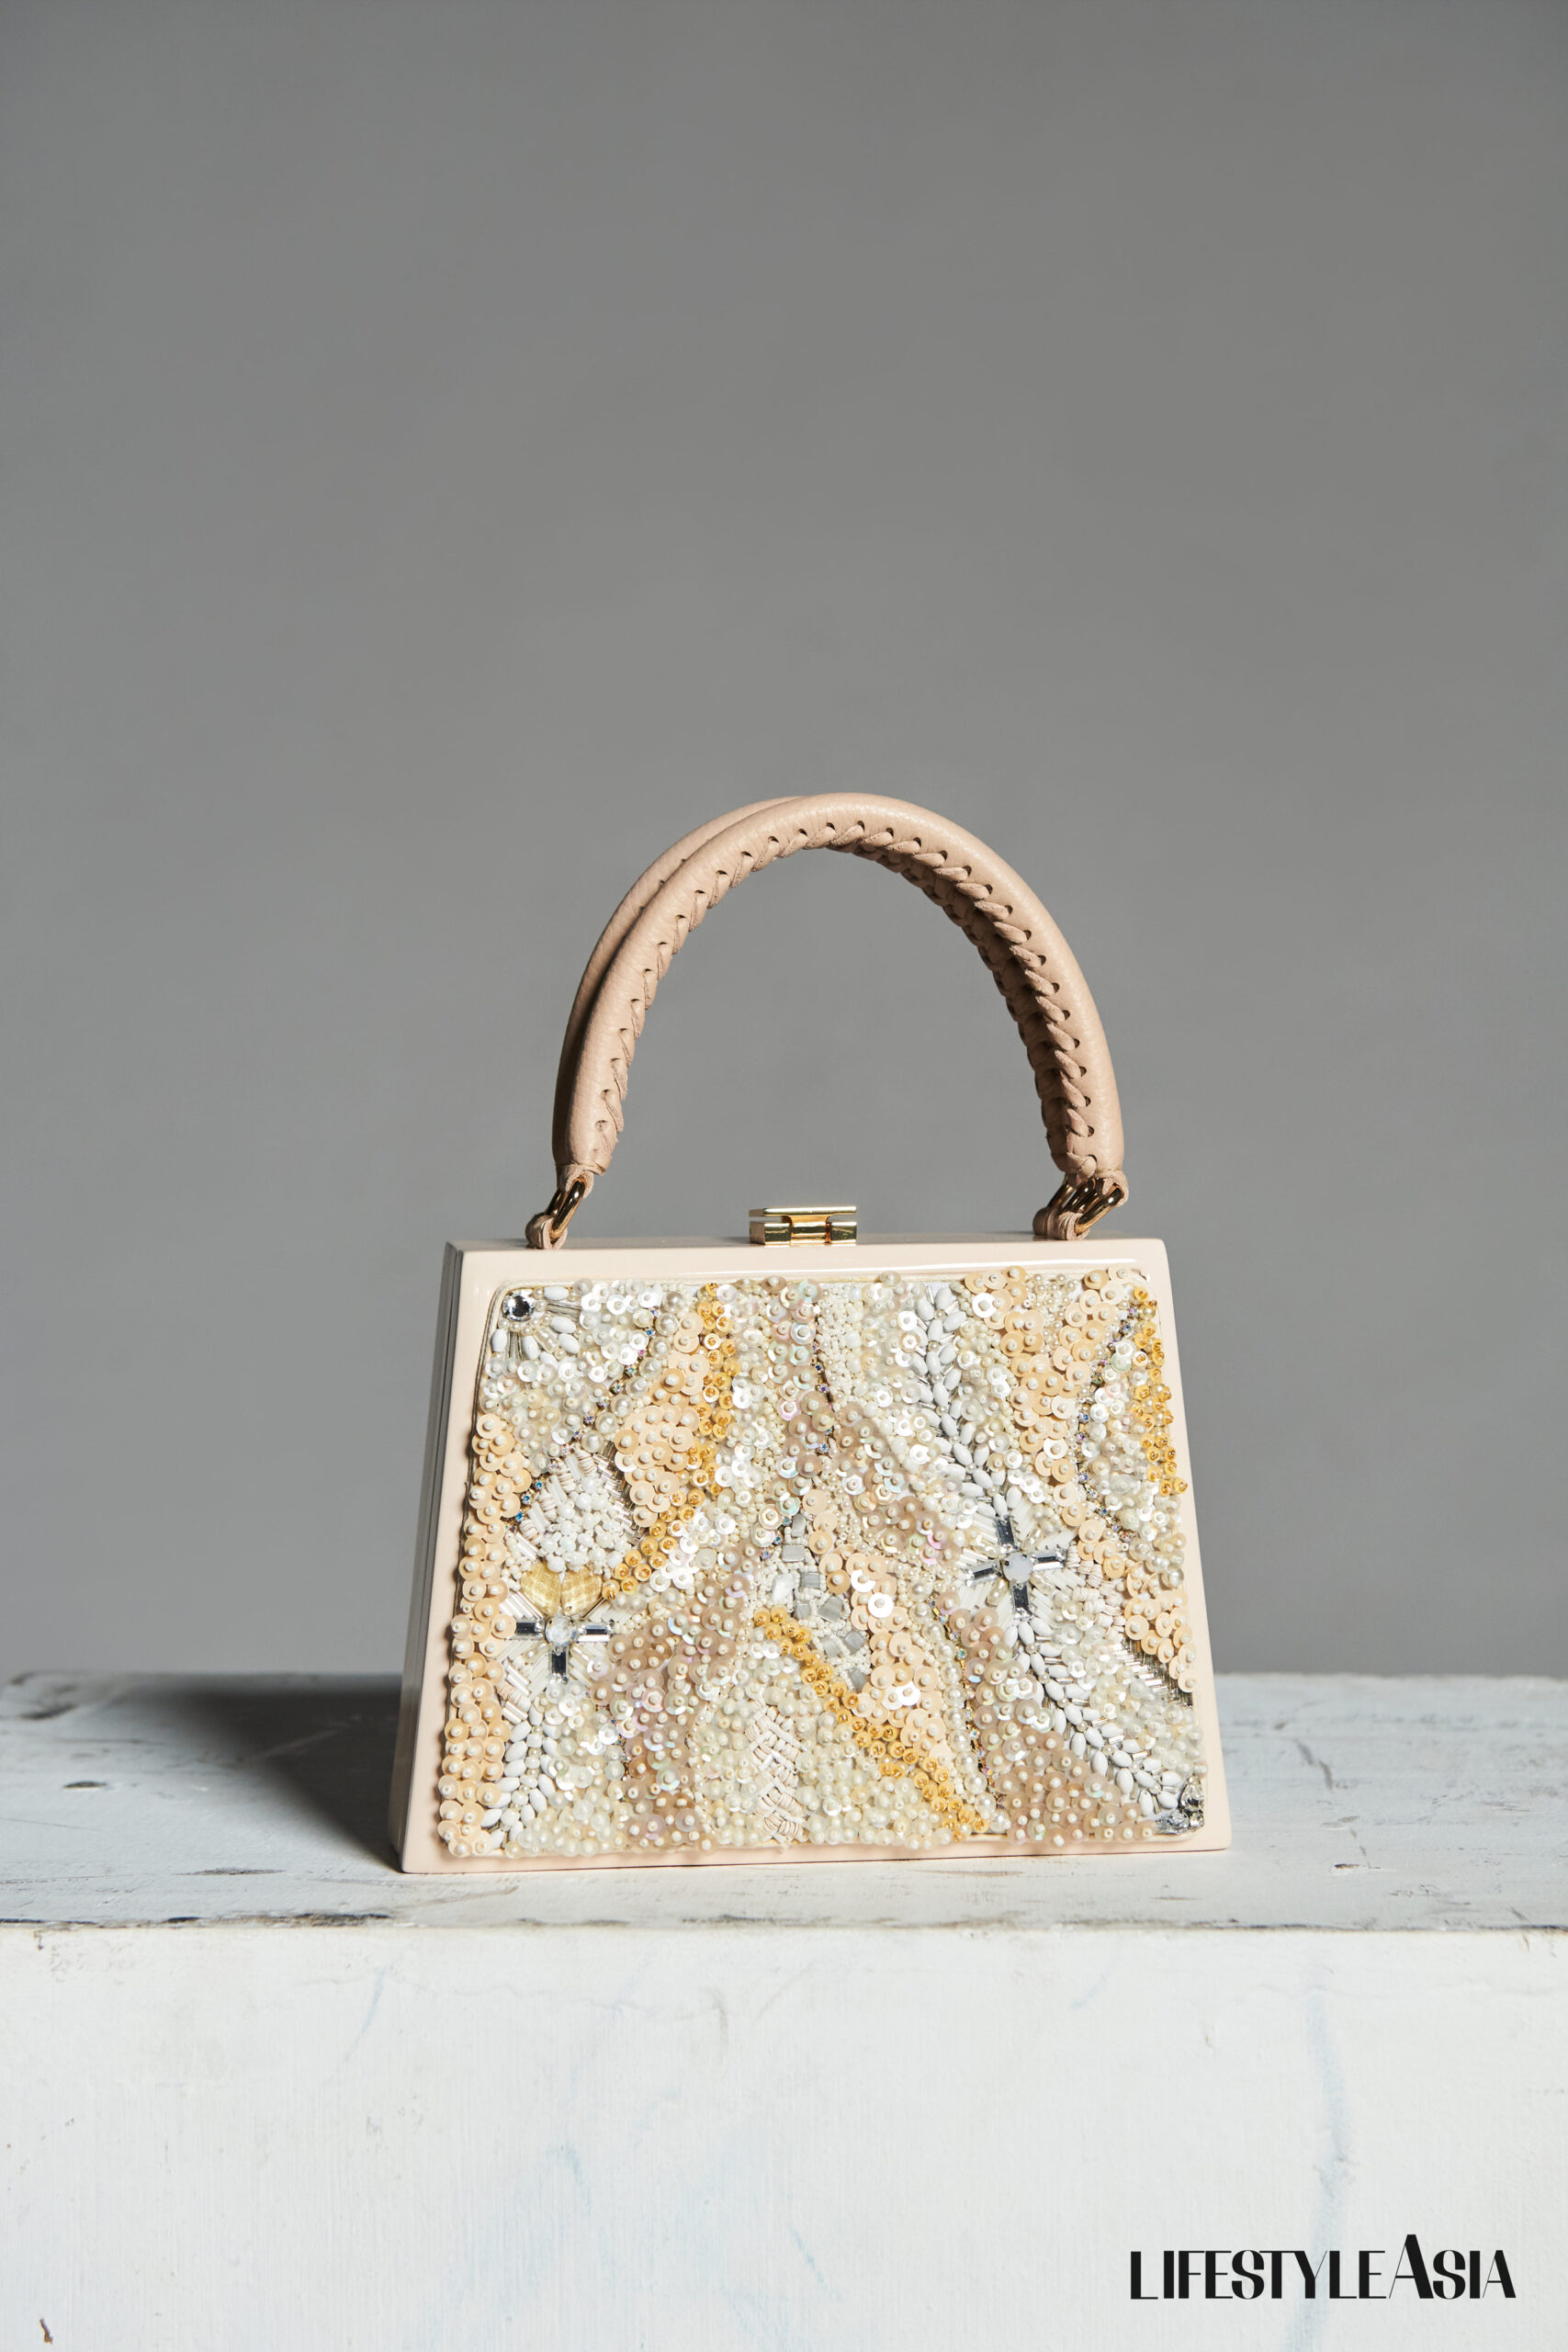 Embroidered bag from Calli Bags